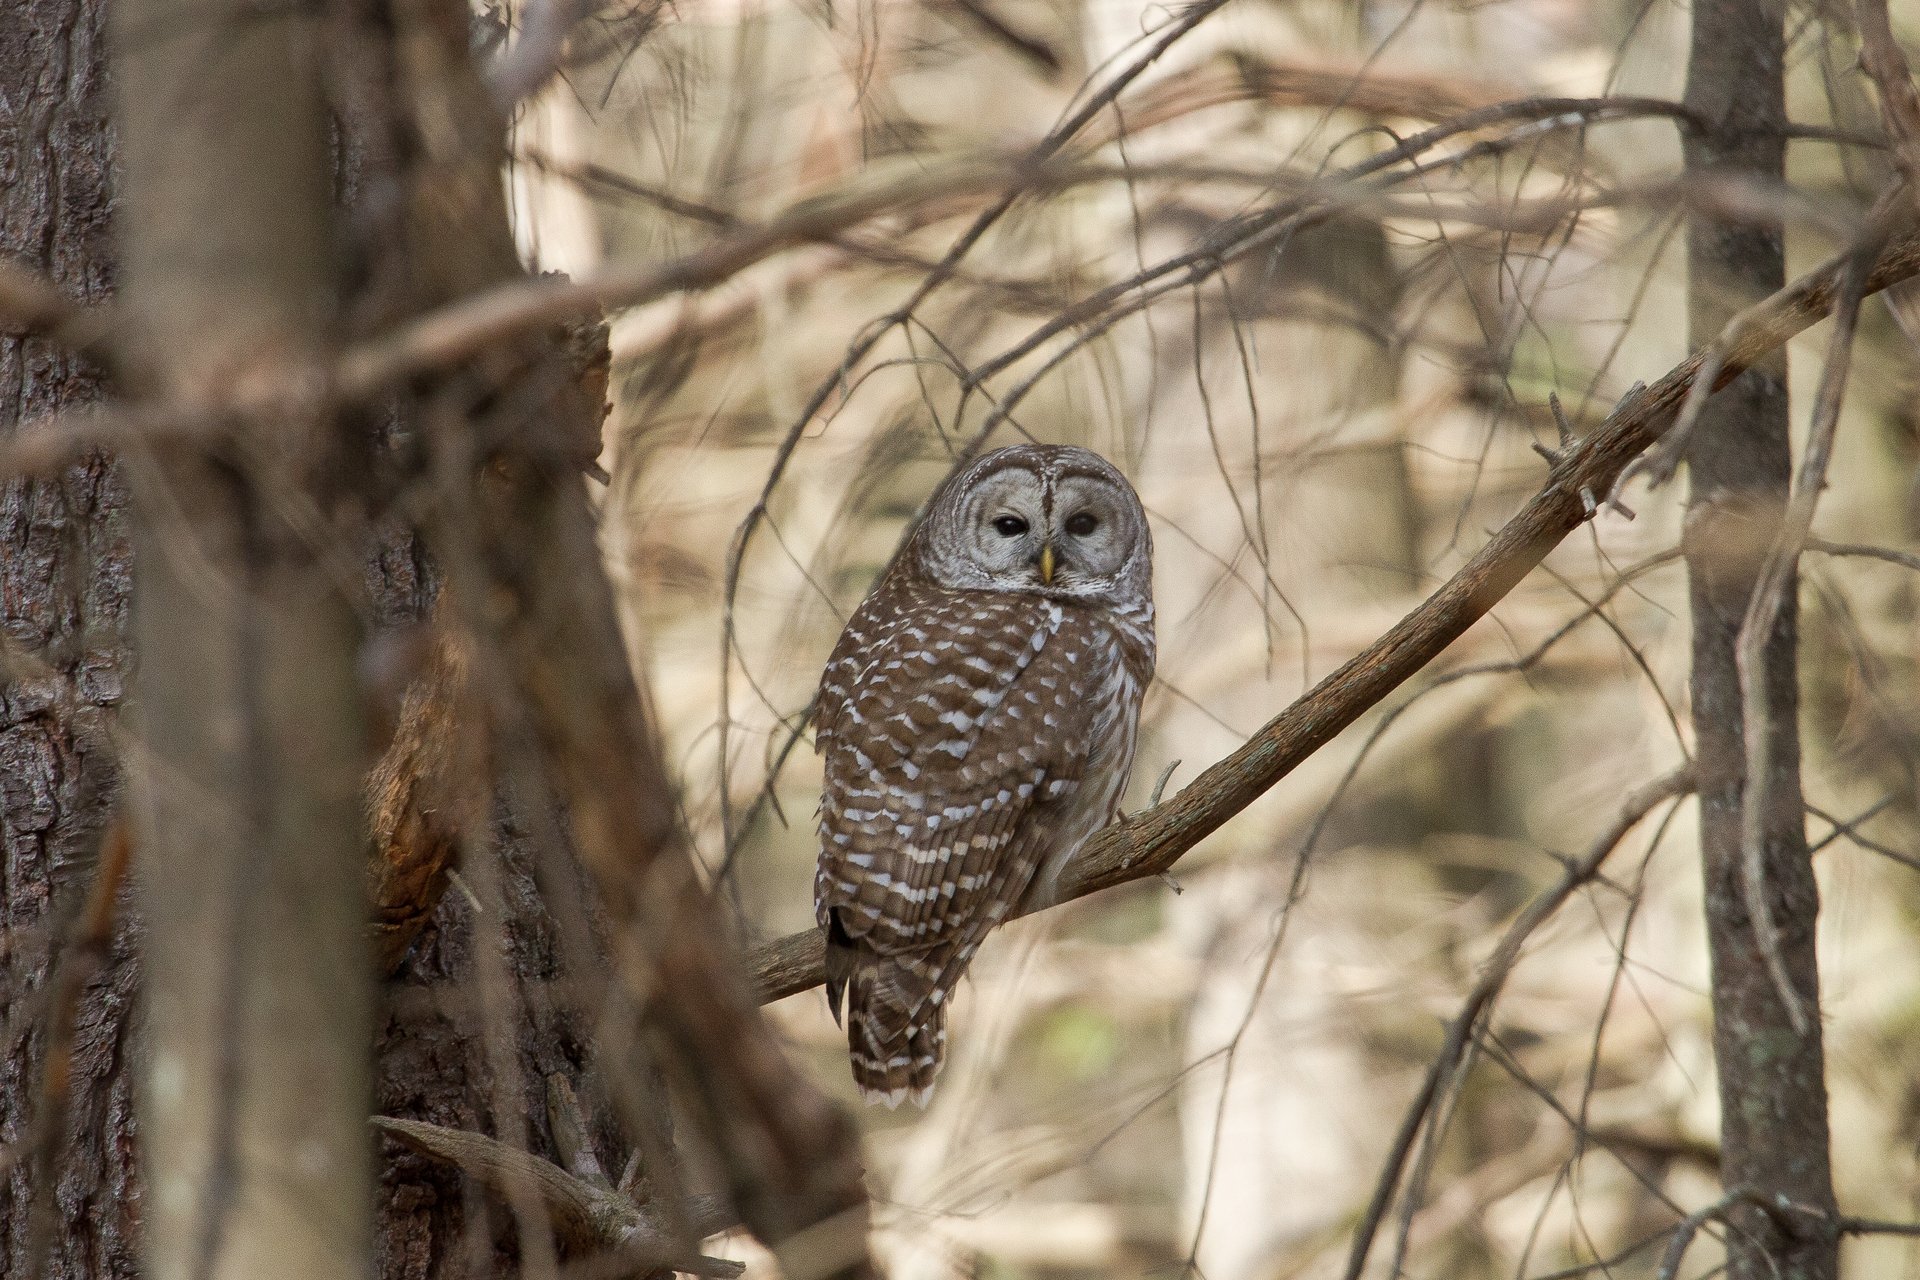 Barred Owl in a Tree